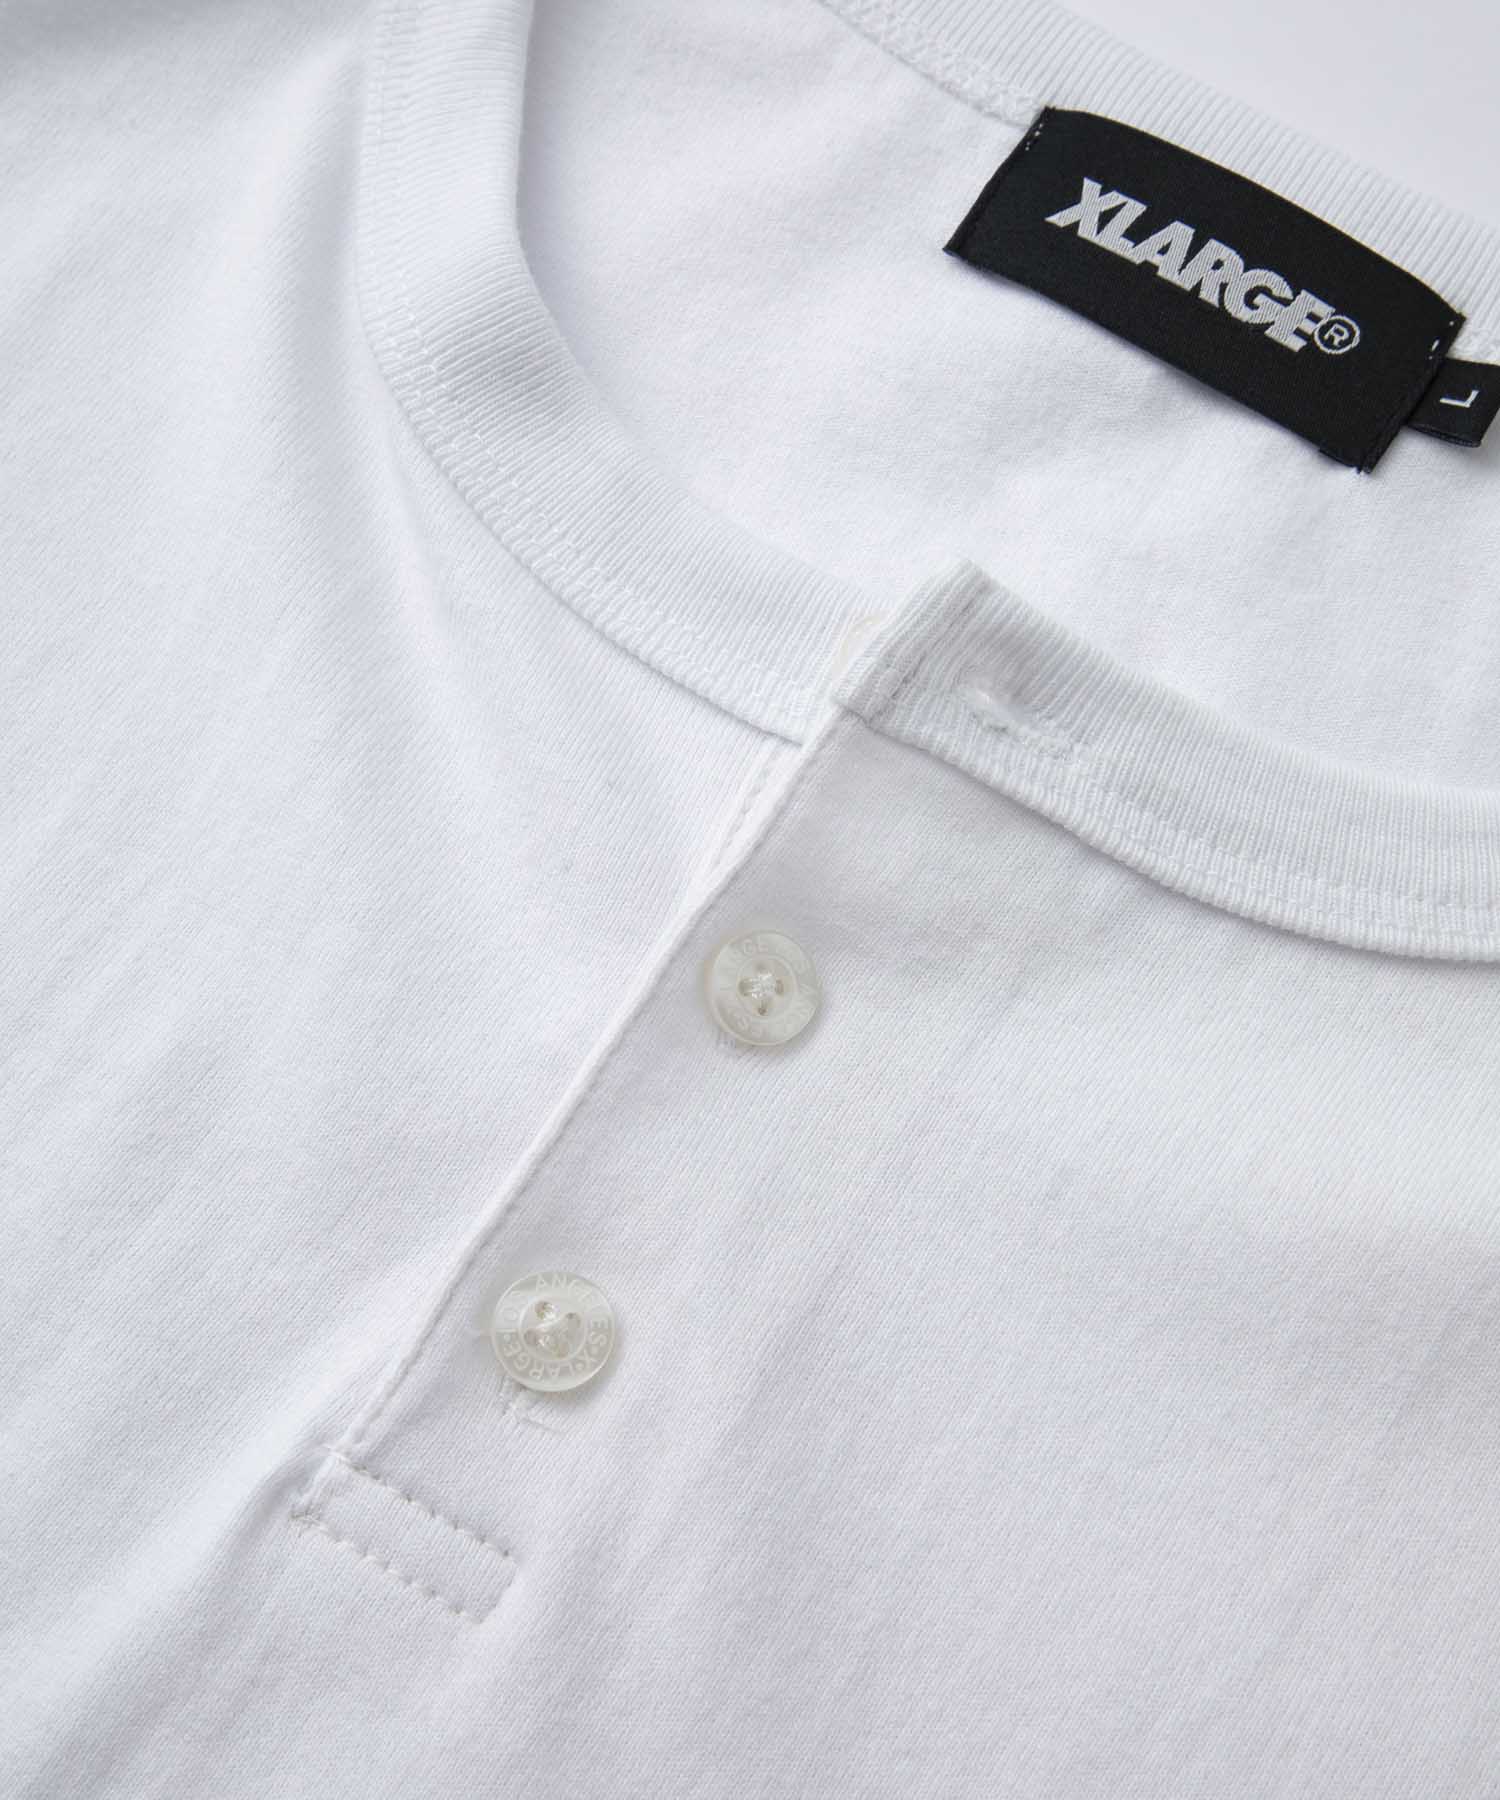 S/S EMBROIDERY HENLEY TEE KNITS XLARGE  